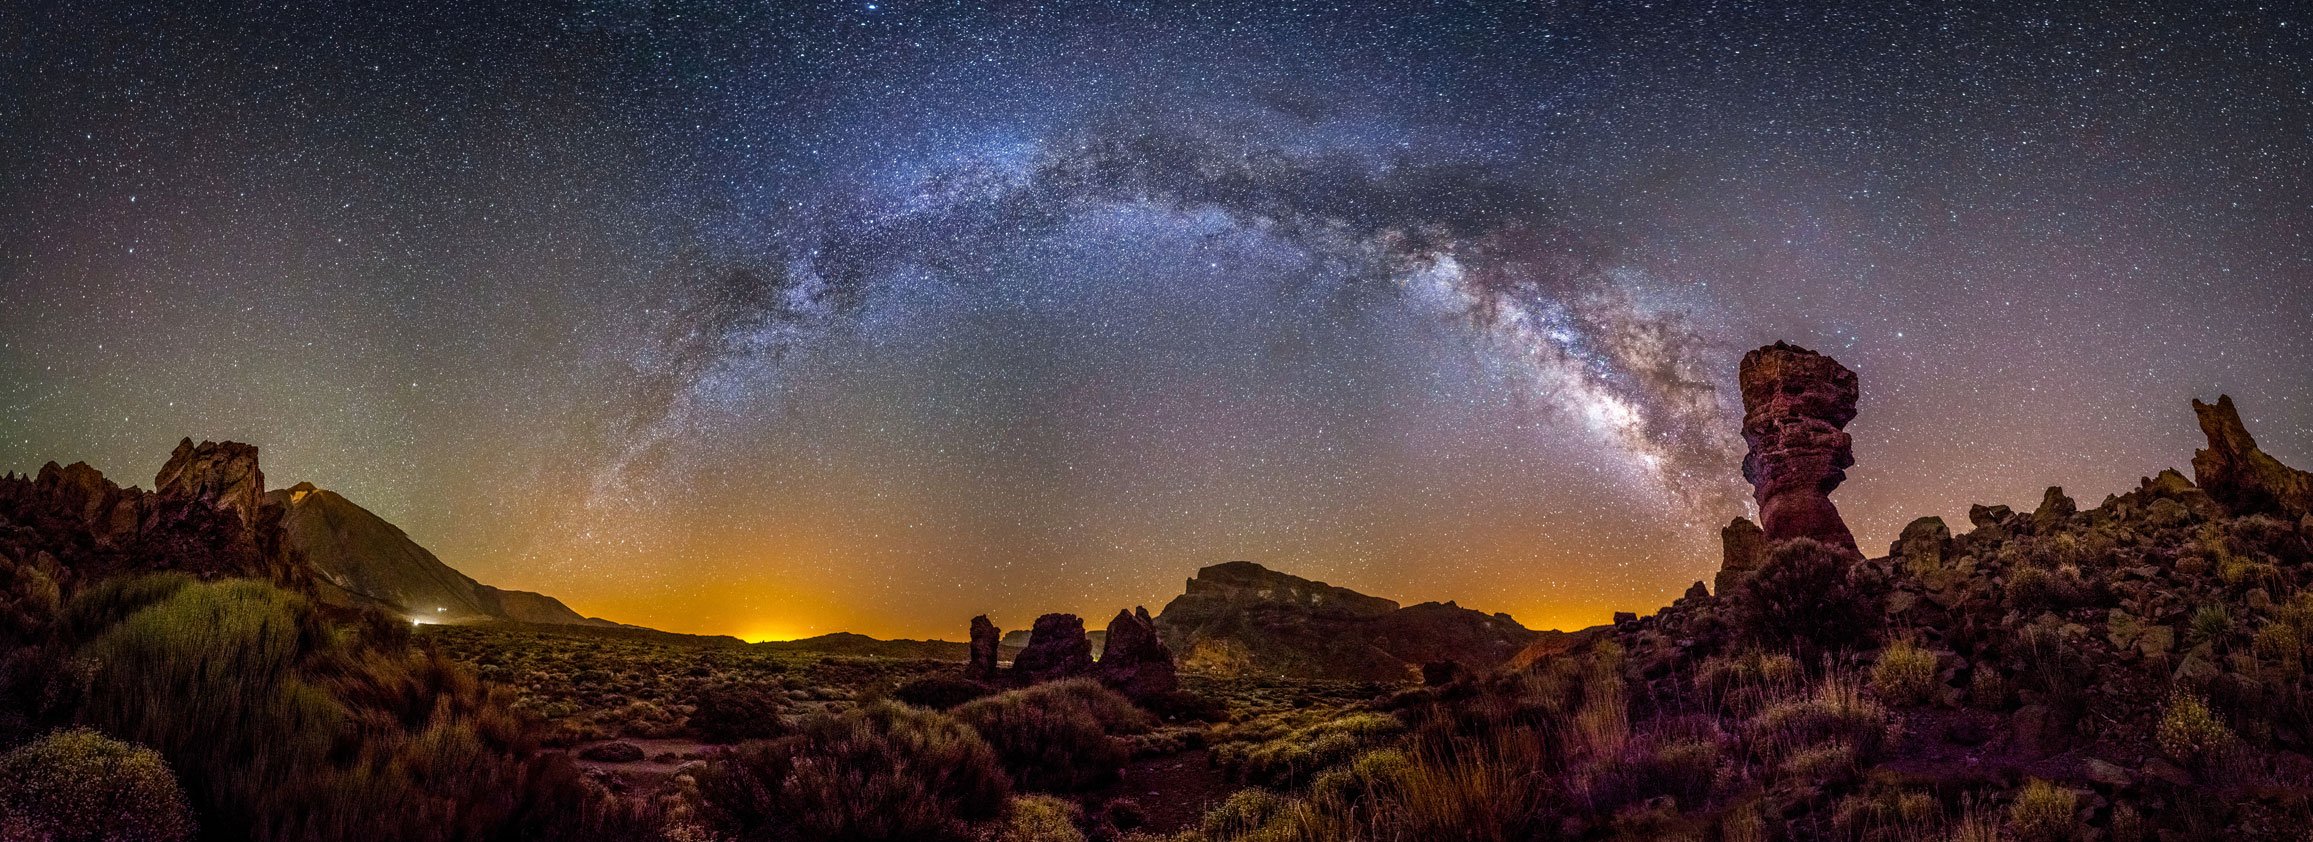 The Milky Way in a parabola over a very craggy and rocky landscape interspersed with tussock grass at night in Canary Islands, Spain